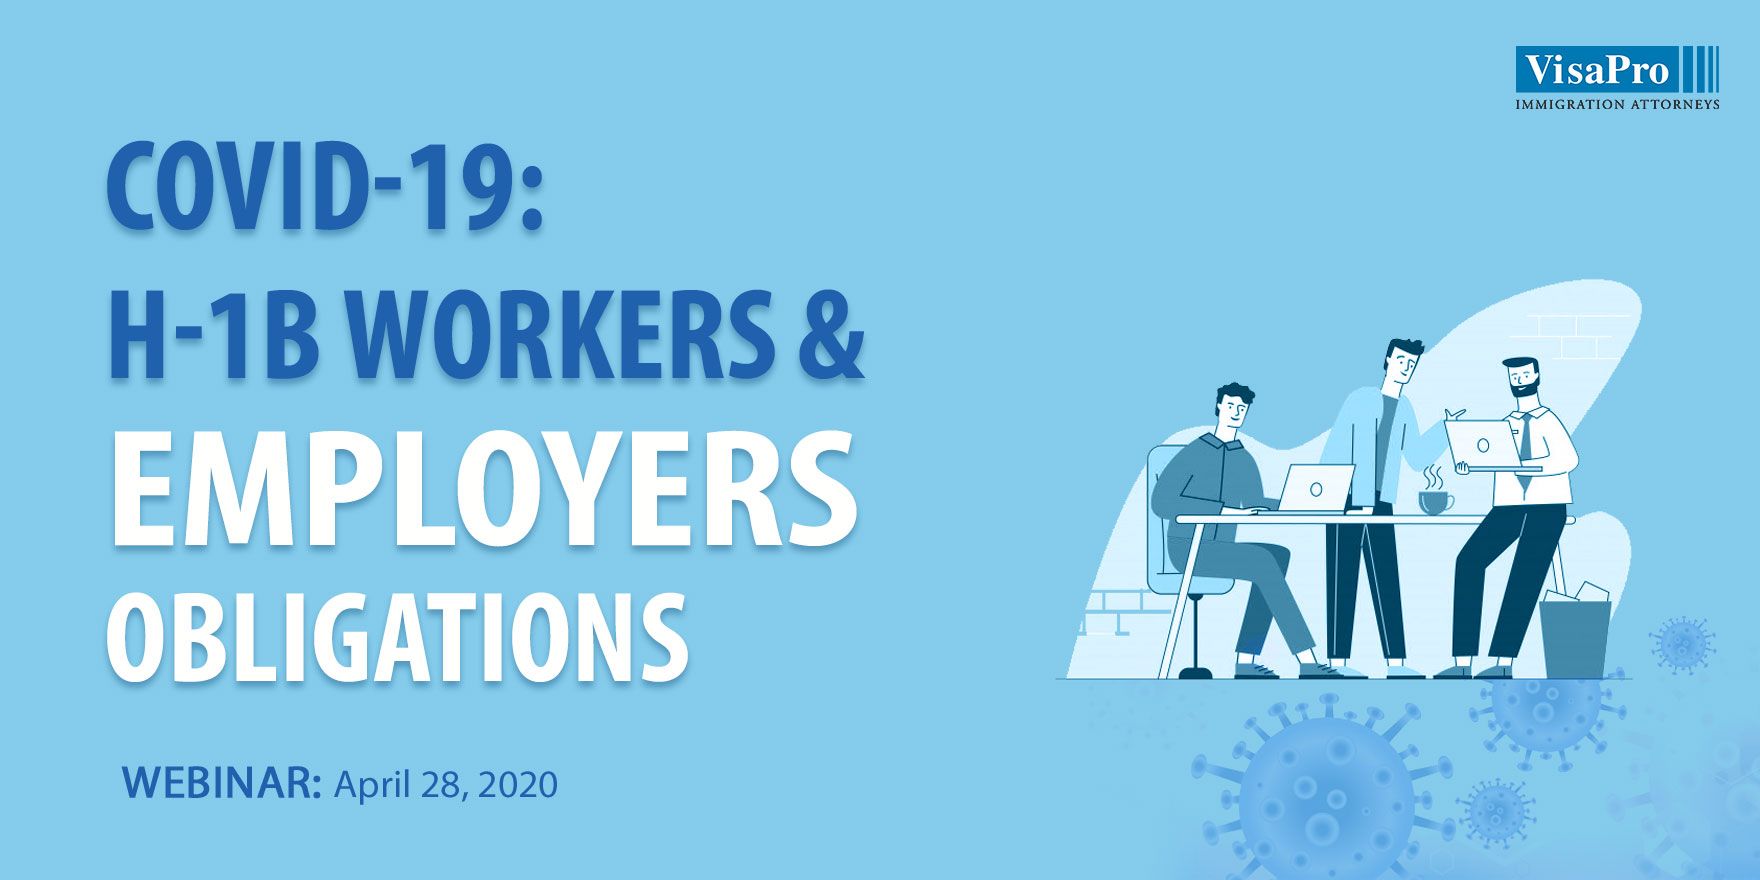 "COVID-19: H-1B Workers & Employers Obligations ", Stockholm, Sweden